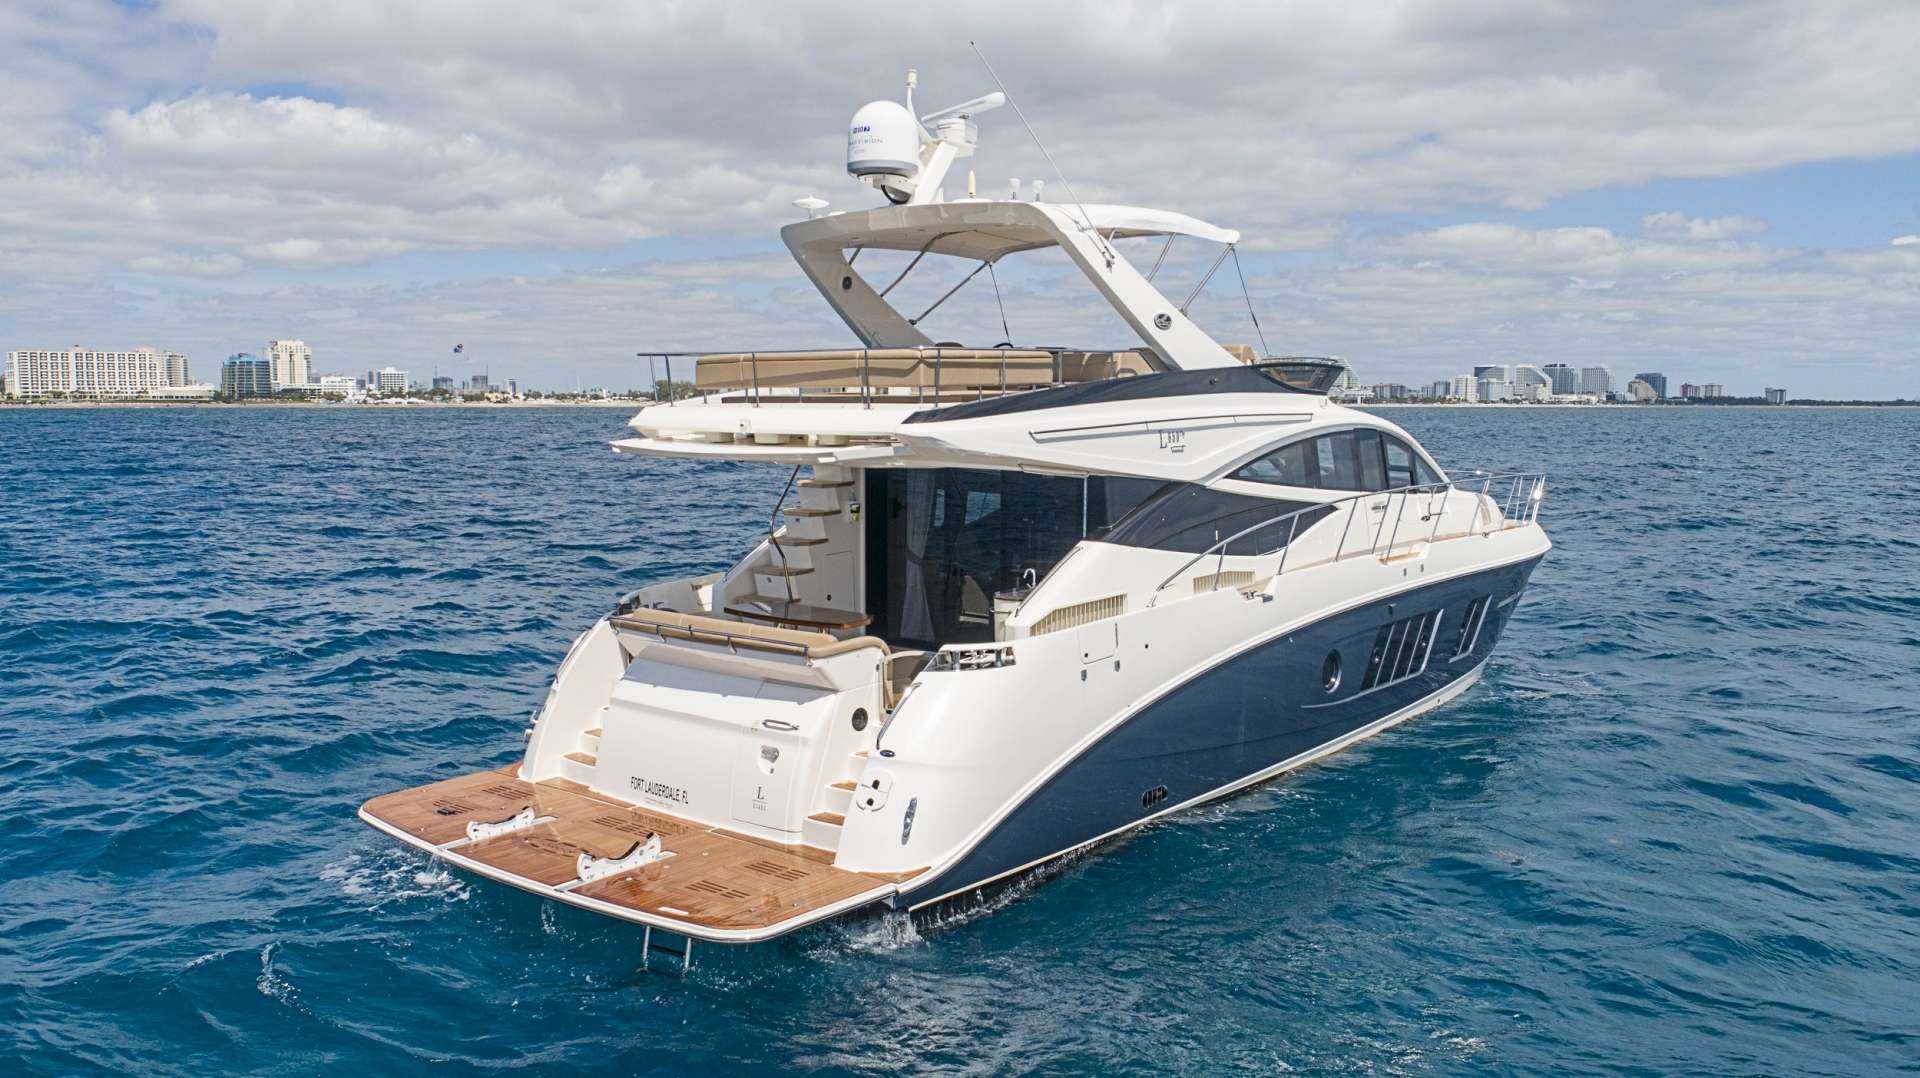 Motor Yacht 'MR. GV' PStern view, 5 PAX, 65.00 Ft, 19.00 Meters, Built 2016, Sea Ray